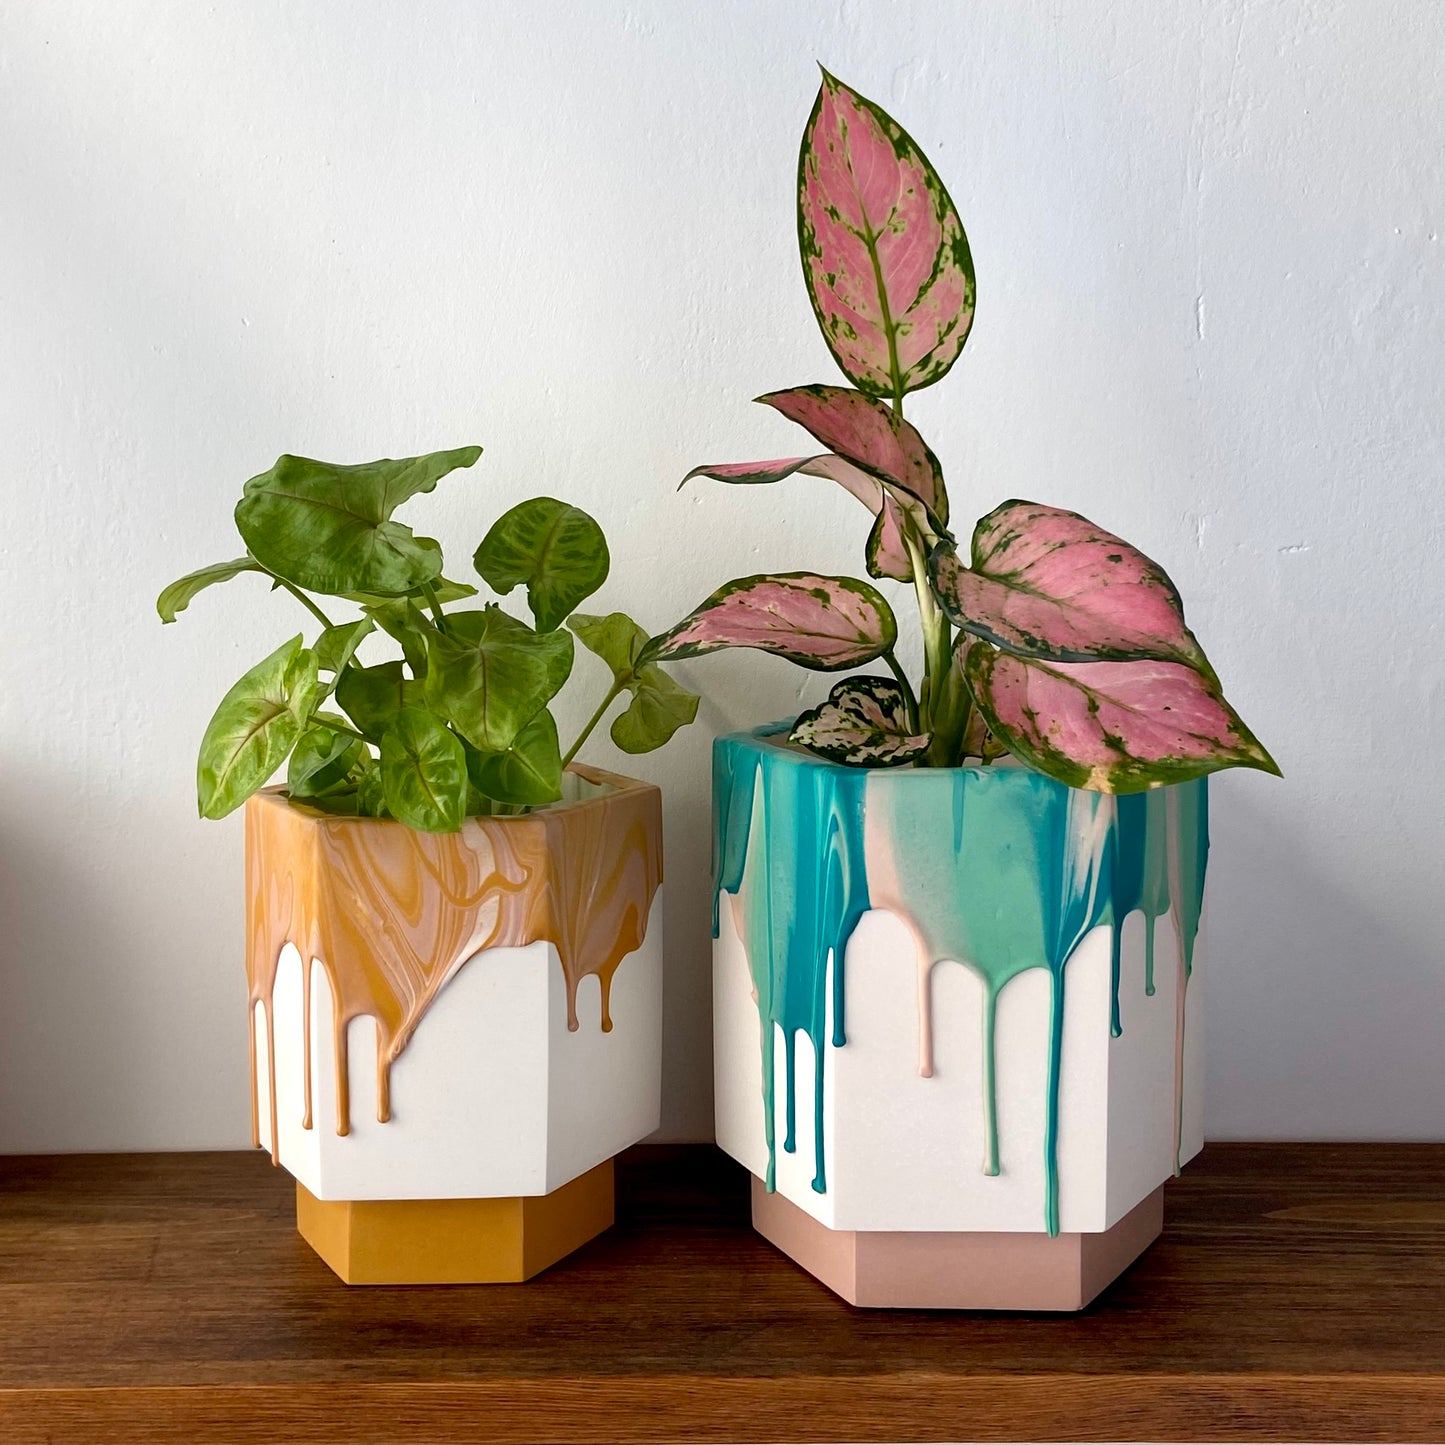 Large drippy plant pot in pink + marbled teal